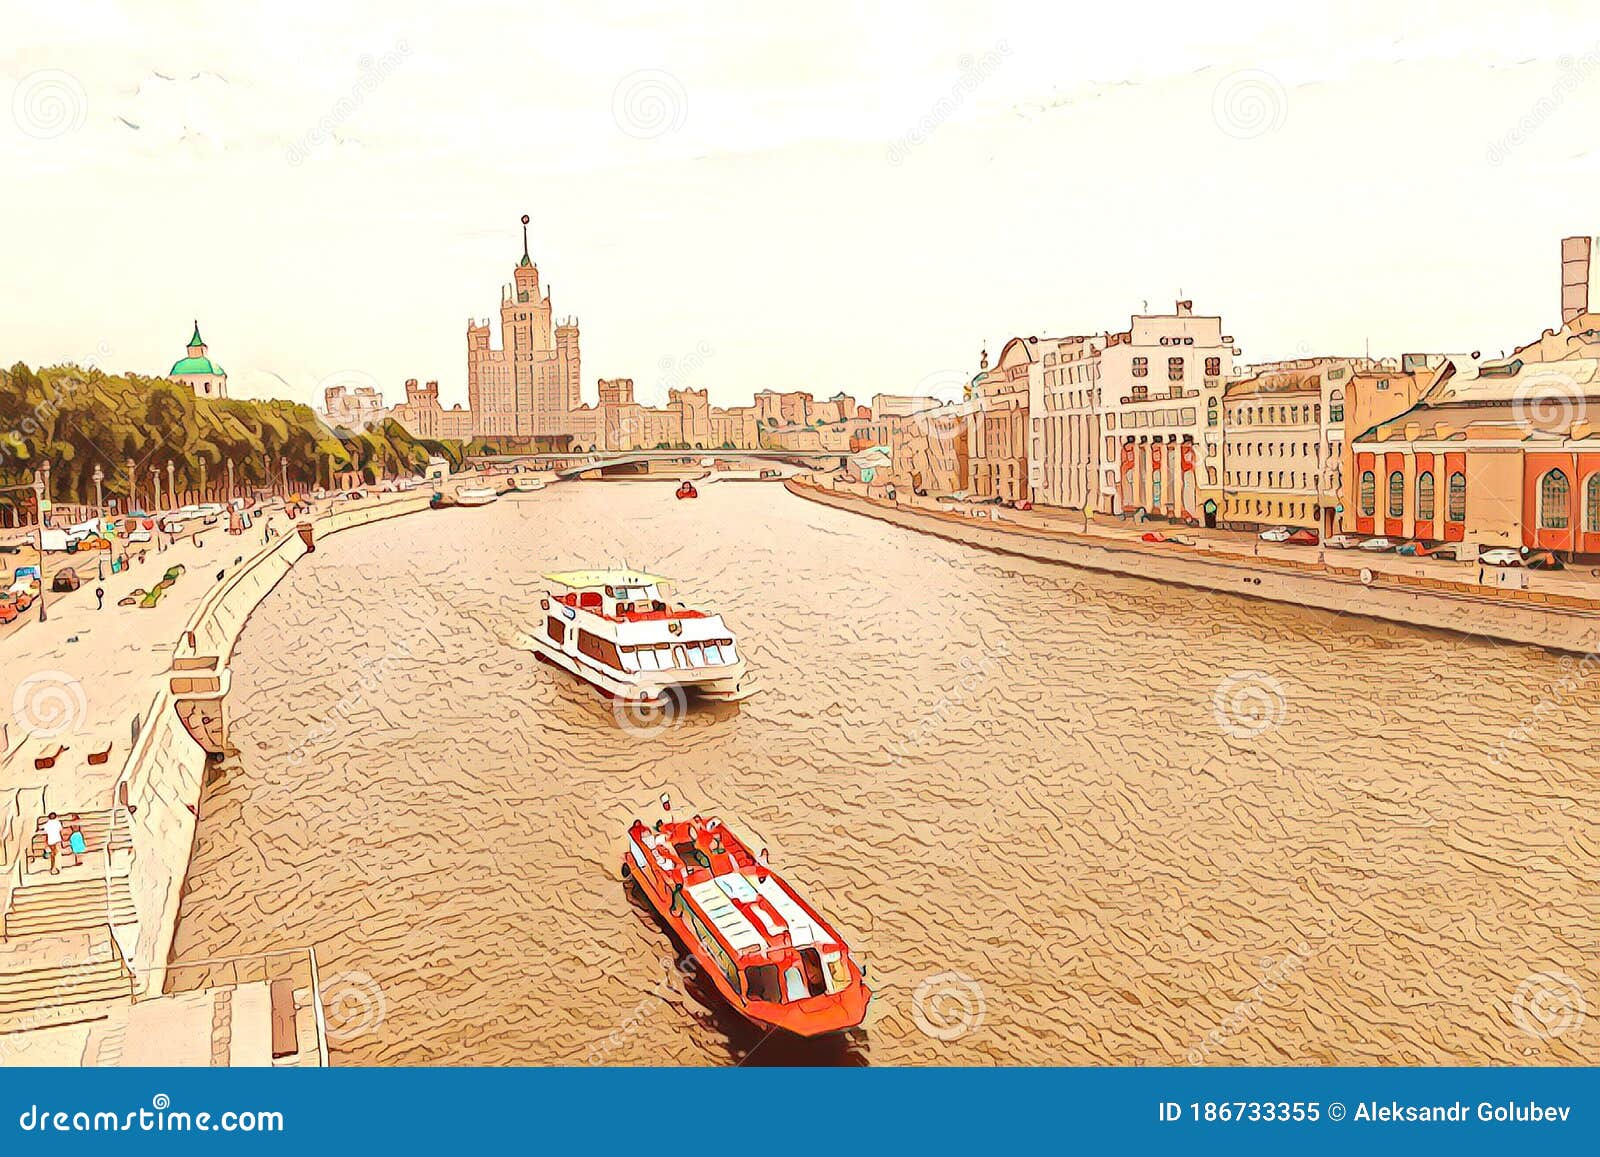 embankment of moscow river with view of hotel ukraina